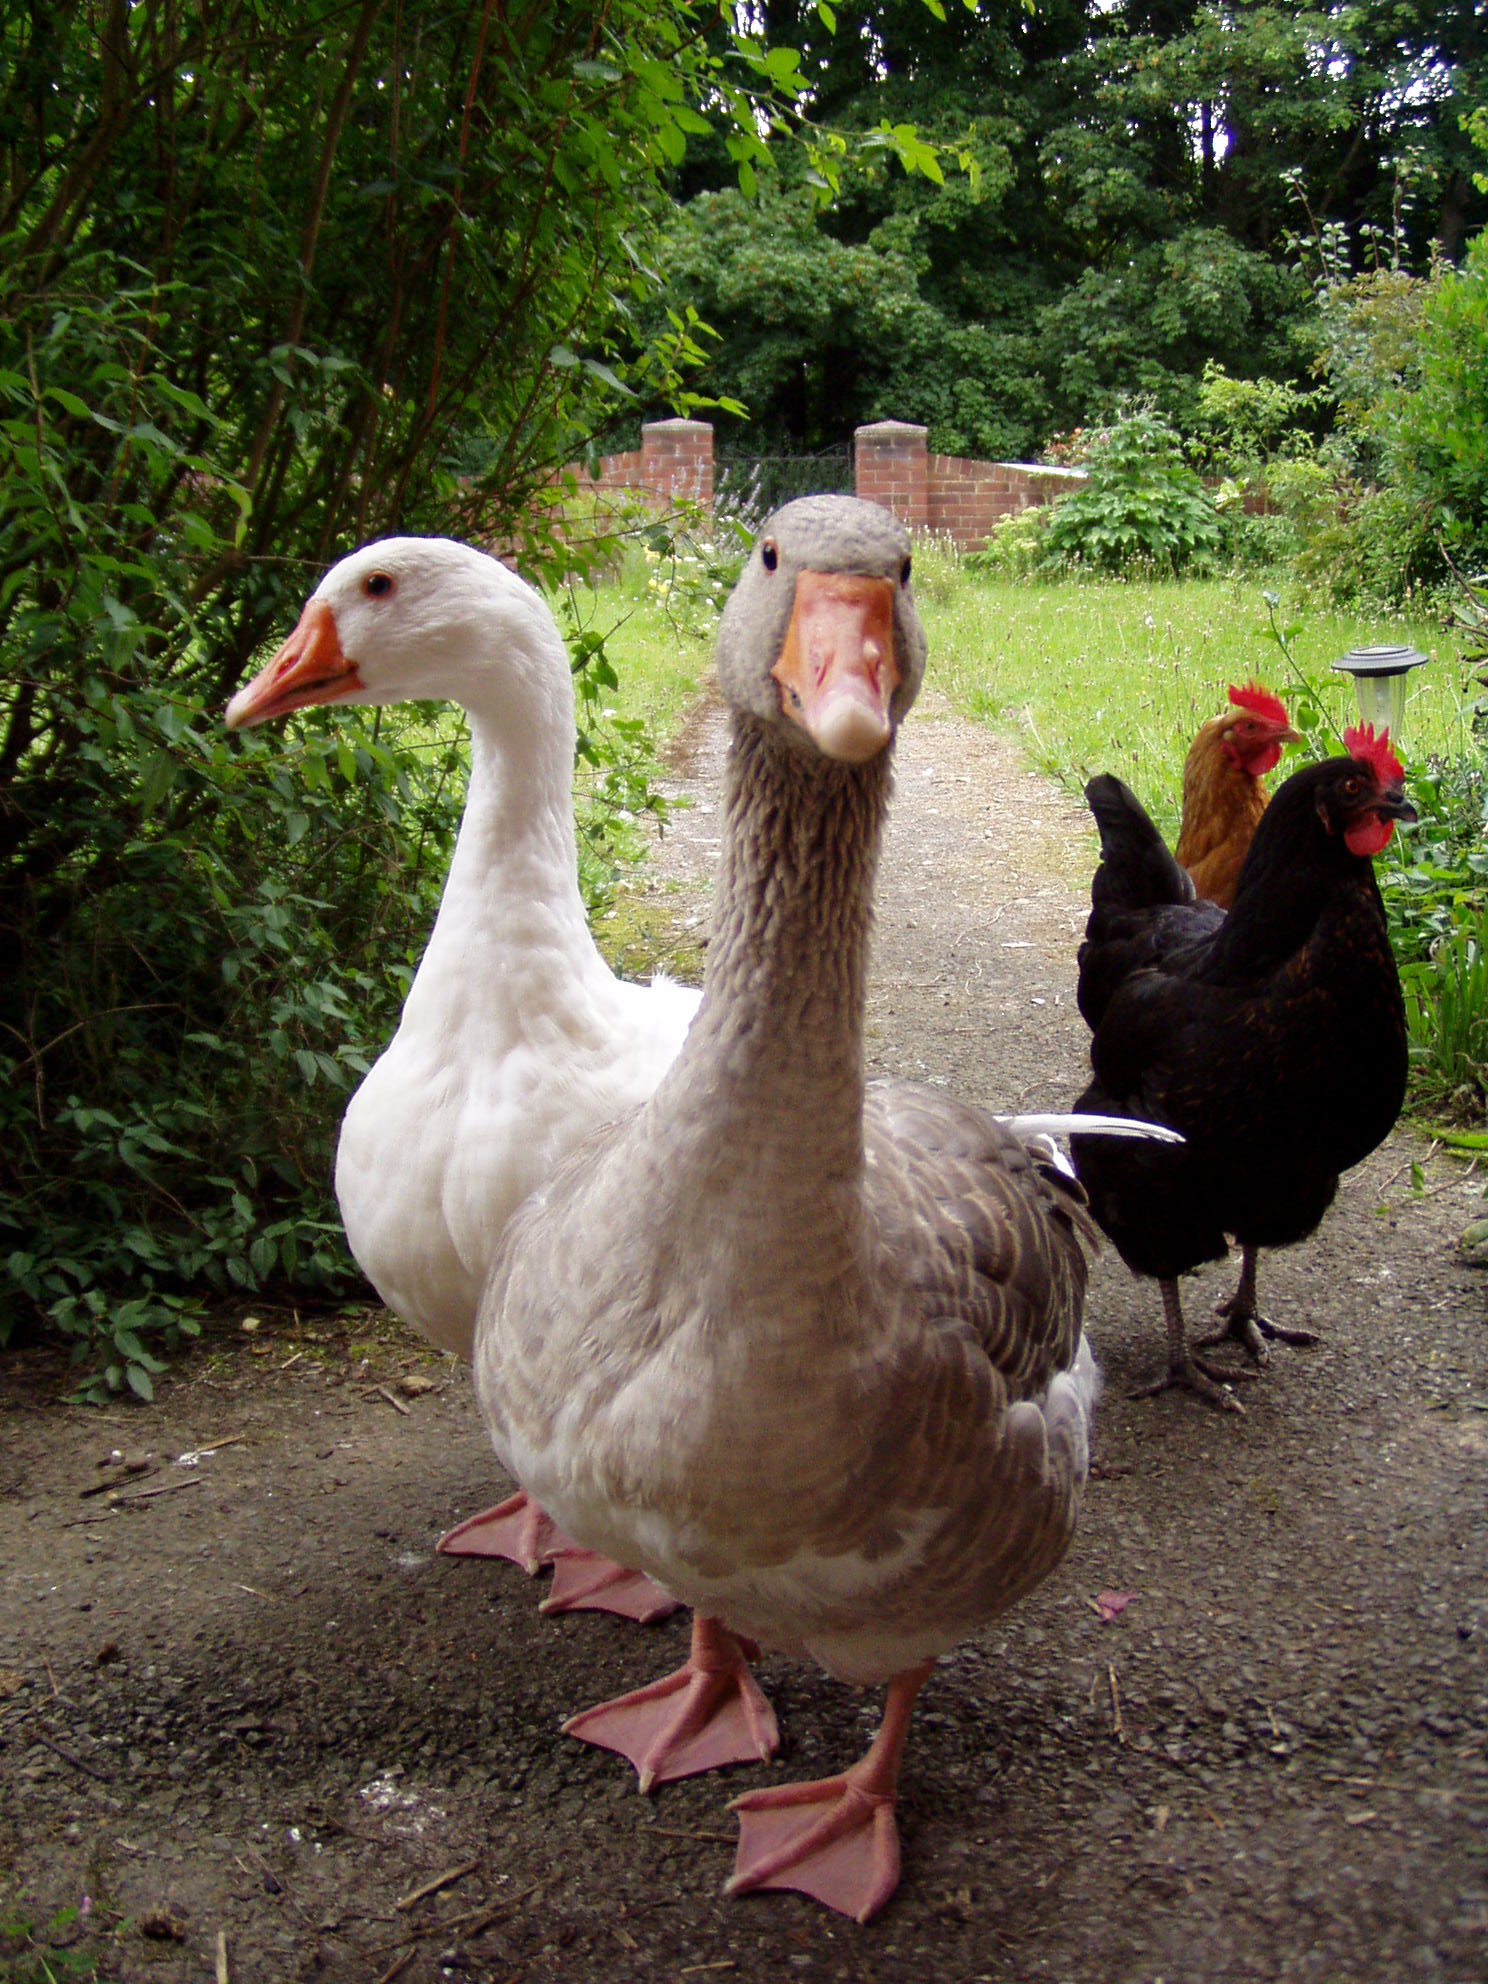 four geese walking around on a path